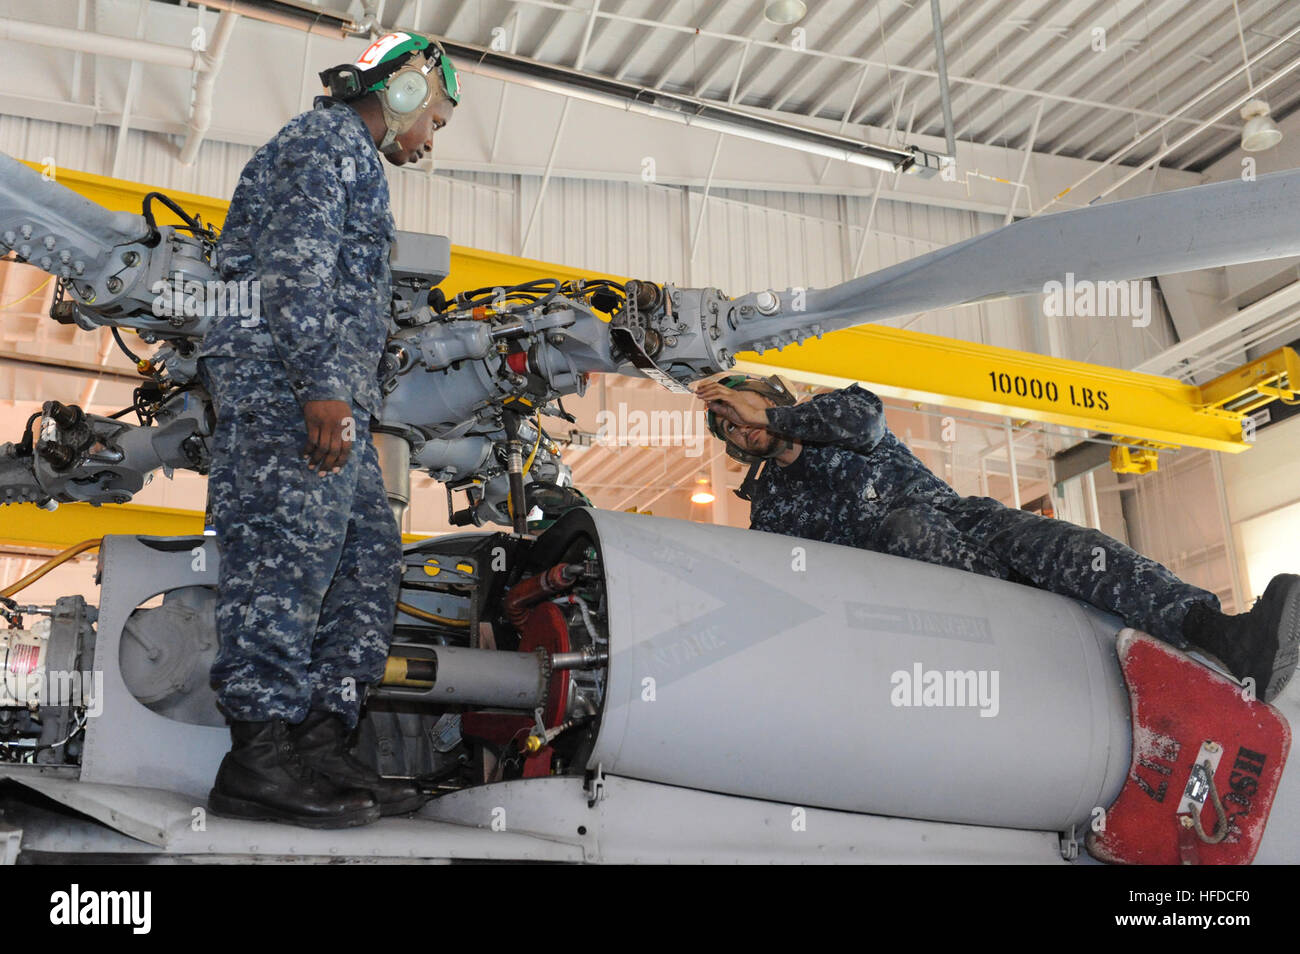 U.S. Navy Aviation Electrician's Mate 2nd Class Vuirou Simmons and Aviation Electrician's Mate 3rd Class Marcus Johnson do maintenance work on an MH-60S Seahawk helicopter with Helicopter Sea Combat Squadron (HSC) 9 at Naval Station Norfolk, Va., where the squadron is based, Jan. 17, 2012. (U.S. Navy photo by Engineman 2nd Class Jason Howard/Released) U.S. Navy Aviation Electrician's Mate 2nd Class Vuirou Simmons and Aviation Electrician's Mate 3rd Class Marcus Johnson do maintenance work on an MH-60S Seahawk helicopter with Helicopter Sea Combat Squadron 120117-N-XB816-009 Stock Photo